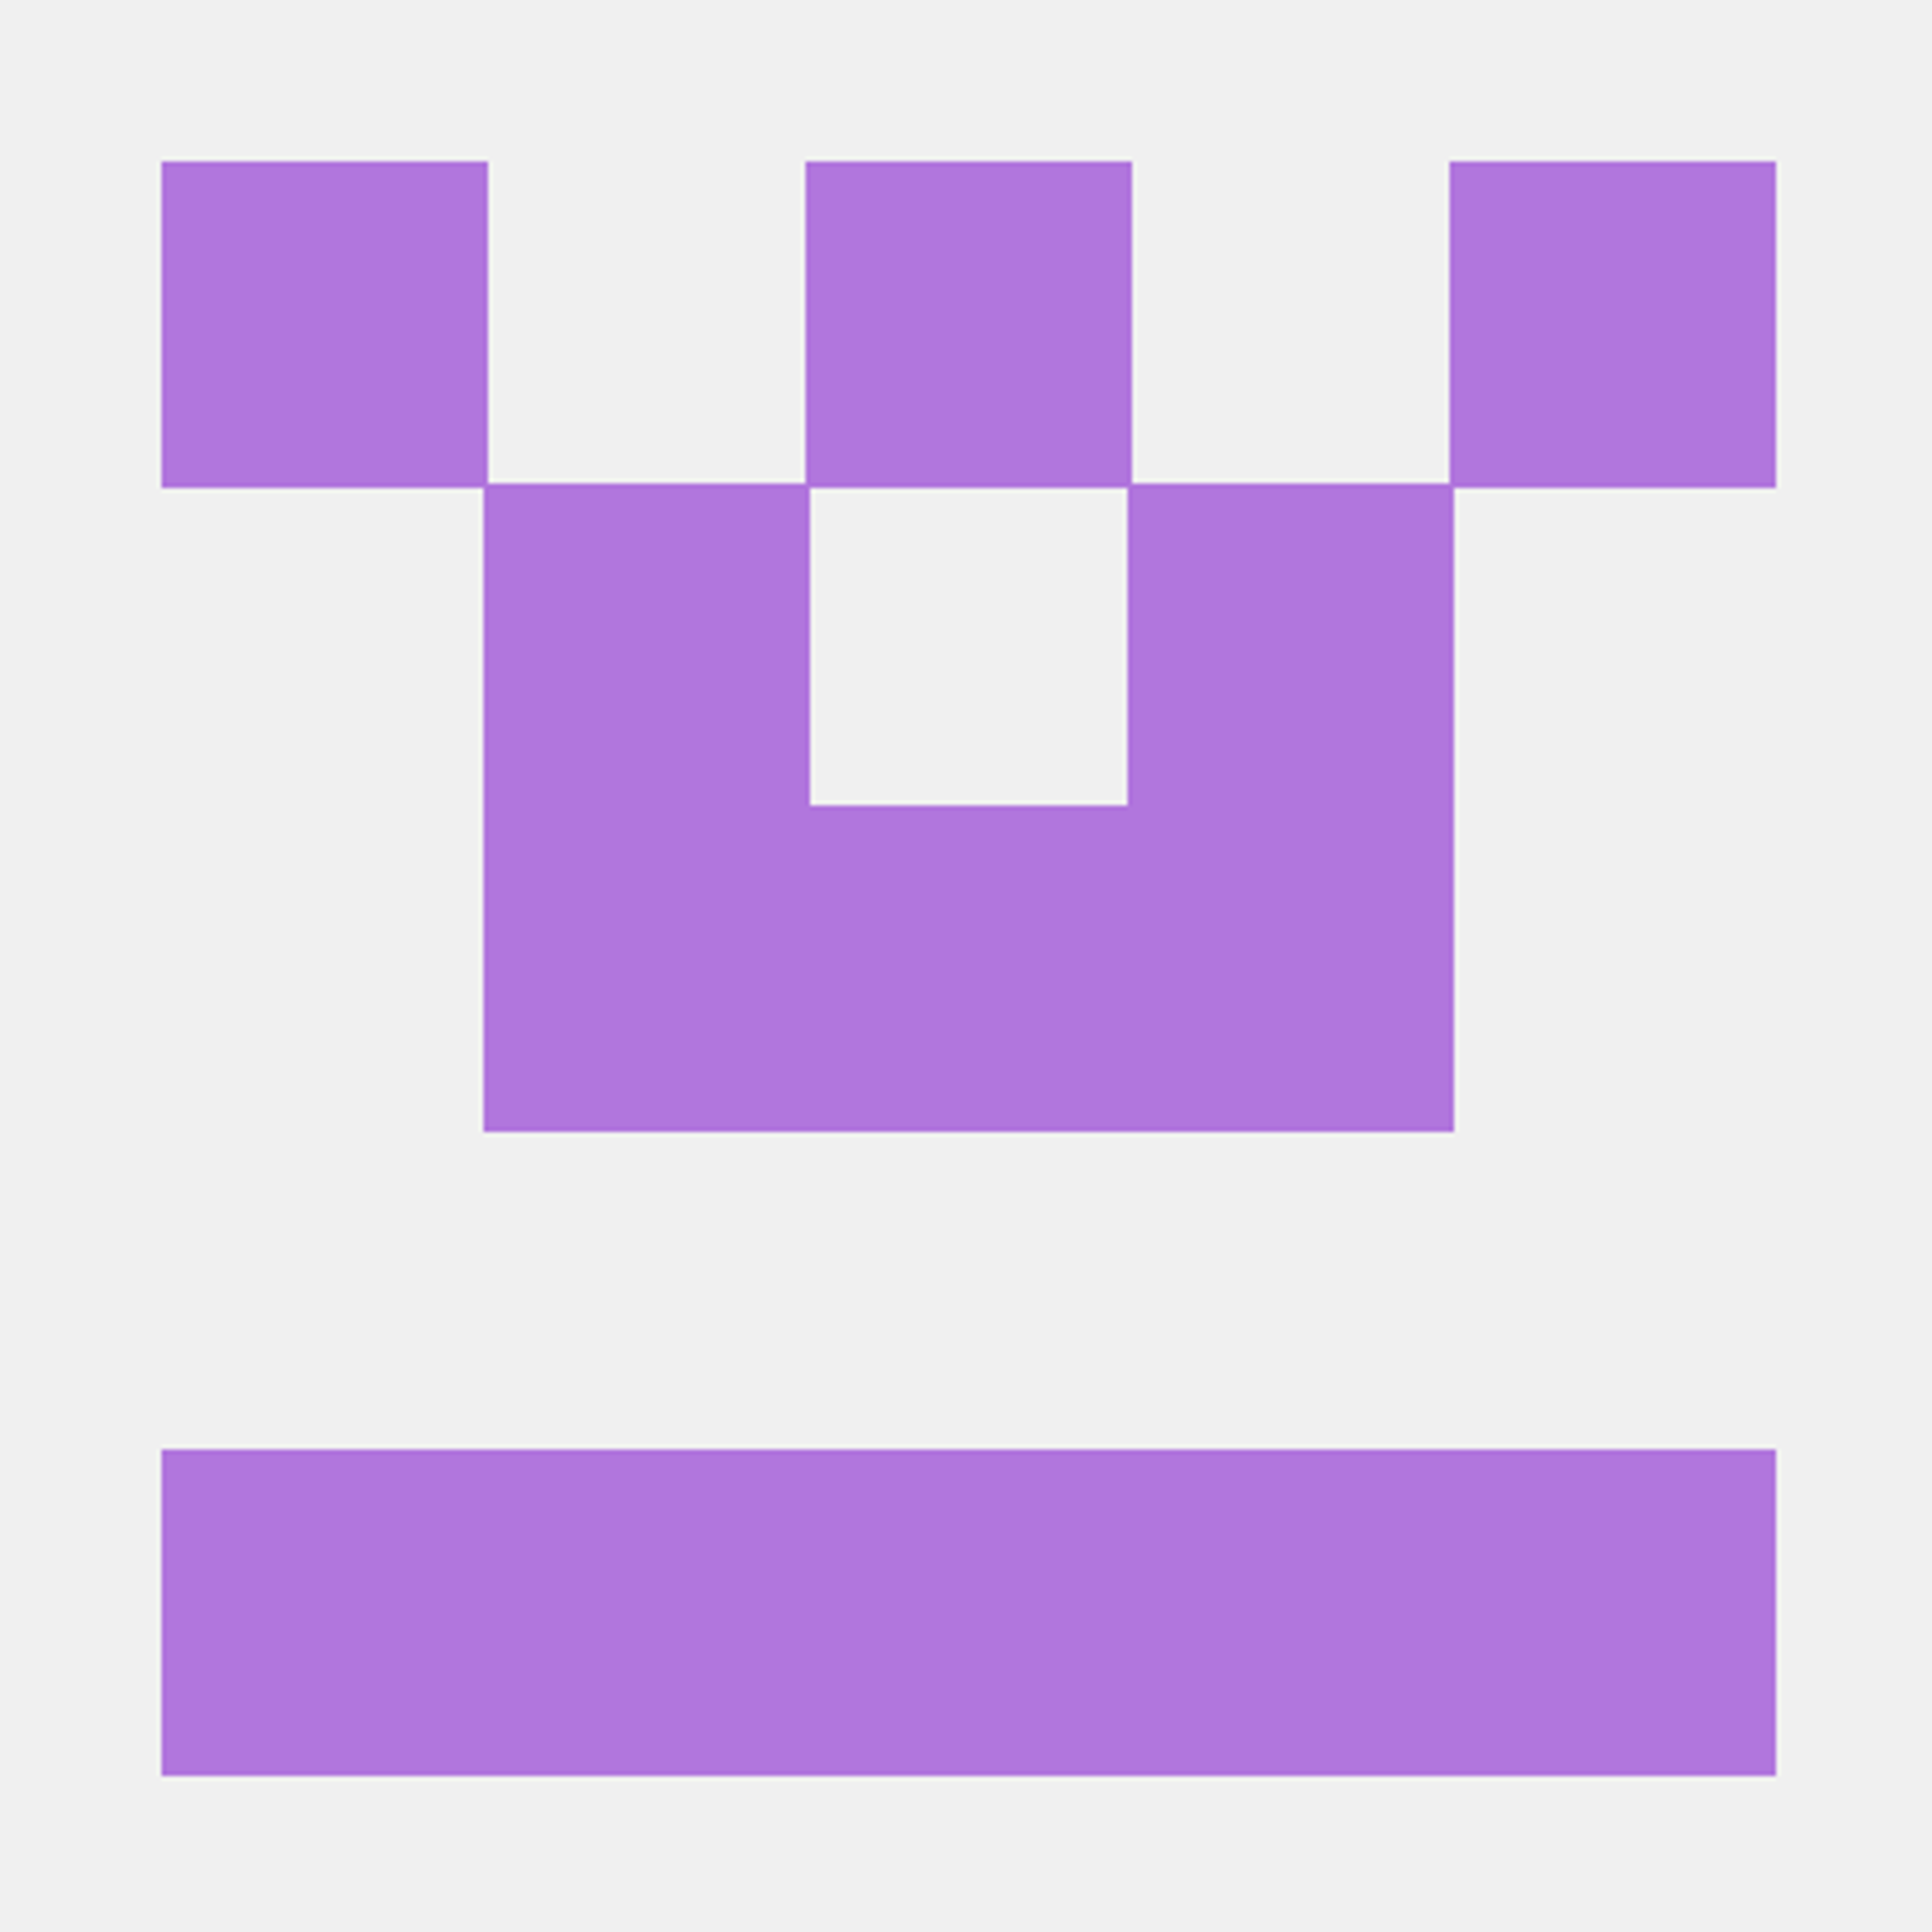 [IMP] core: use Python slots for records by rco-odoo · Pull Request #51075 · odoo/odoo